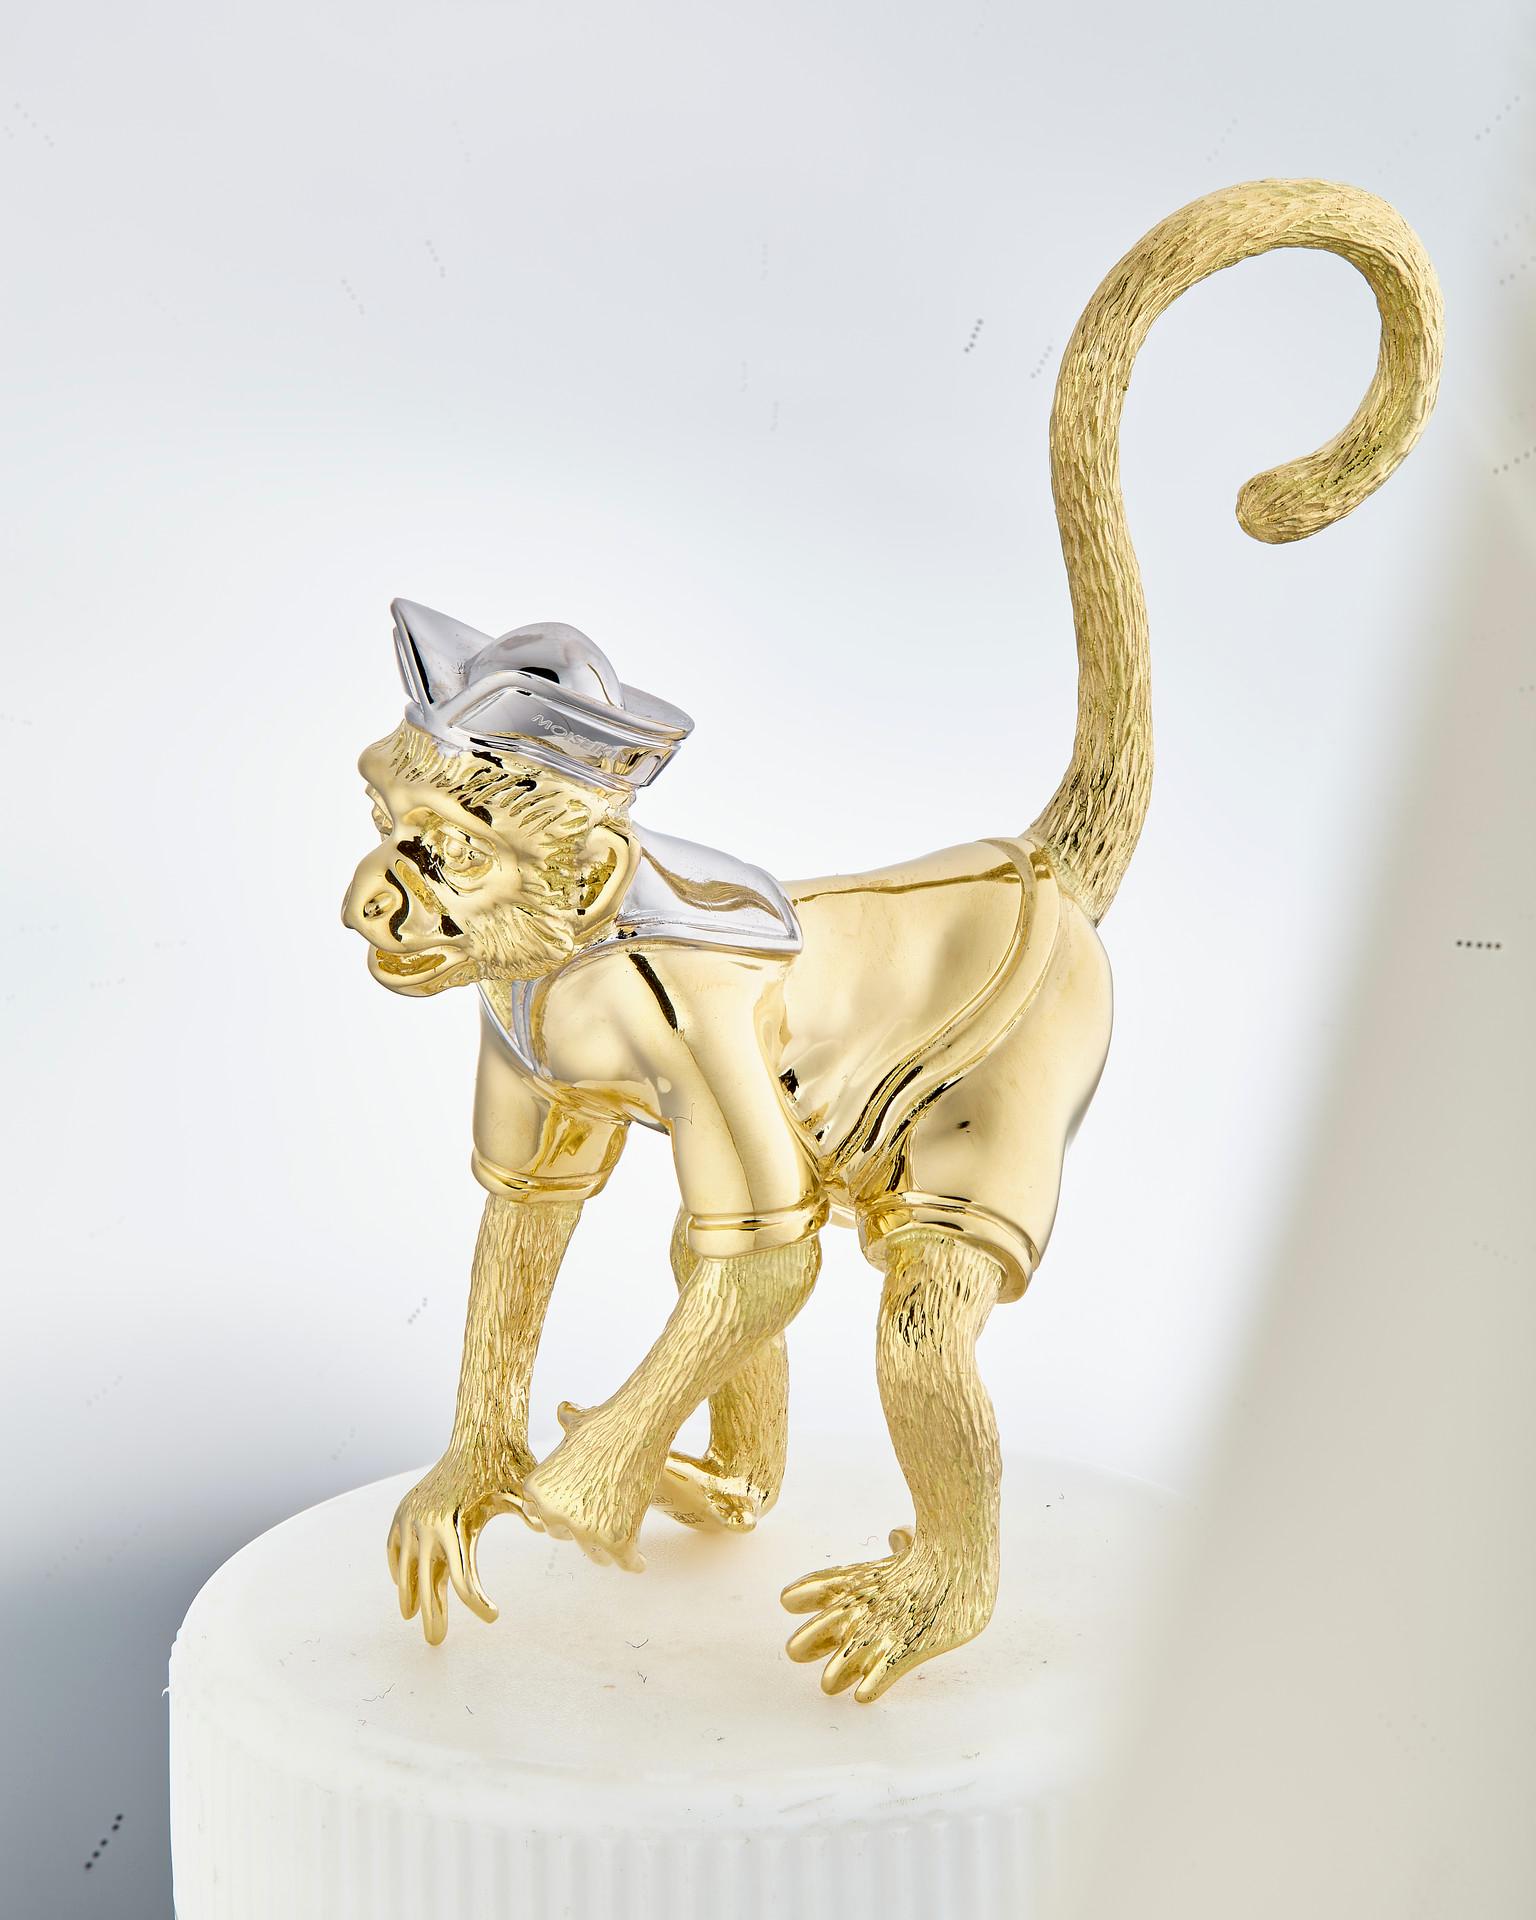 Ad adorable gold monkey from MOISEIKIN® will bring you a charm, becoming your talisman.
Made of 18karat gold, detailed and sophisticated feature of the little monkey plays multiple functions as a decoration, a card holder, and a playful toy.

18K